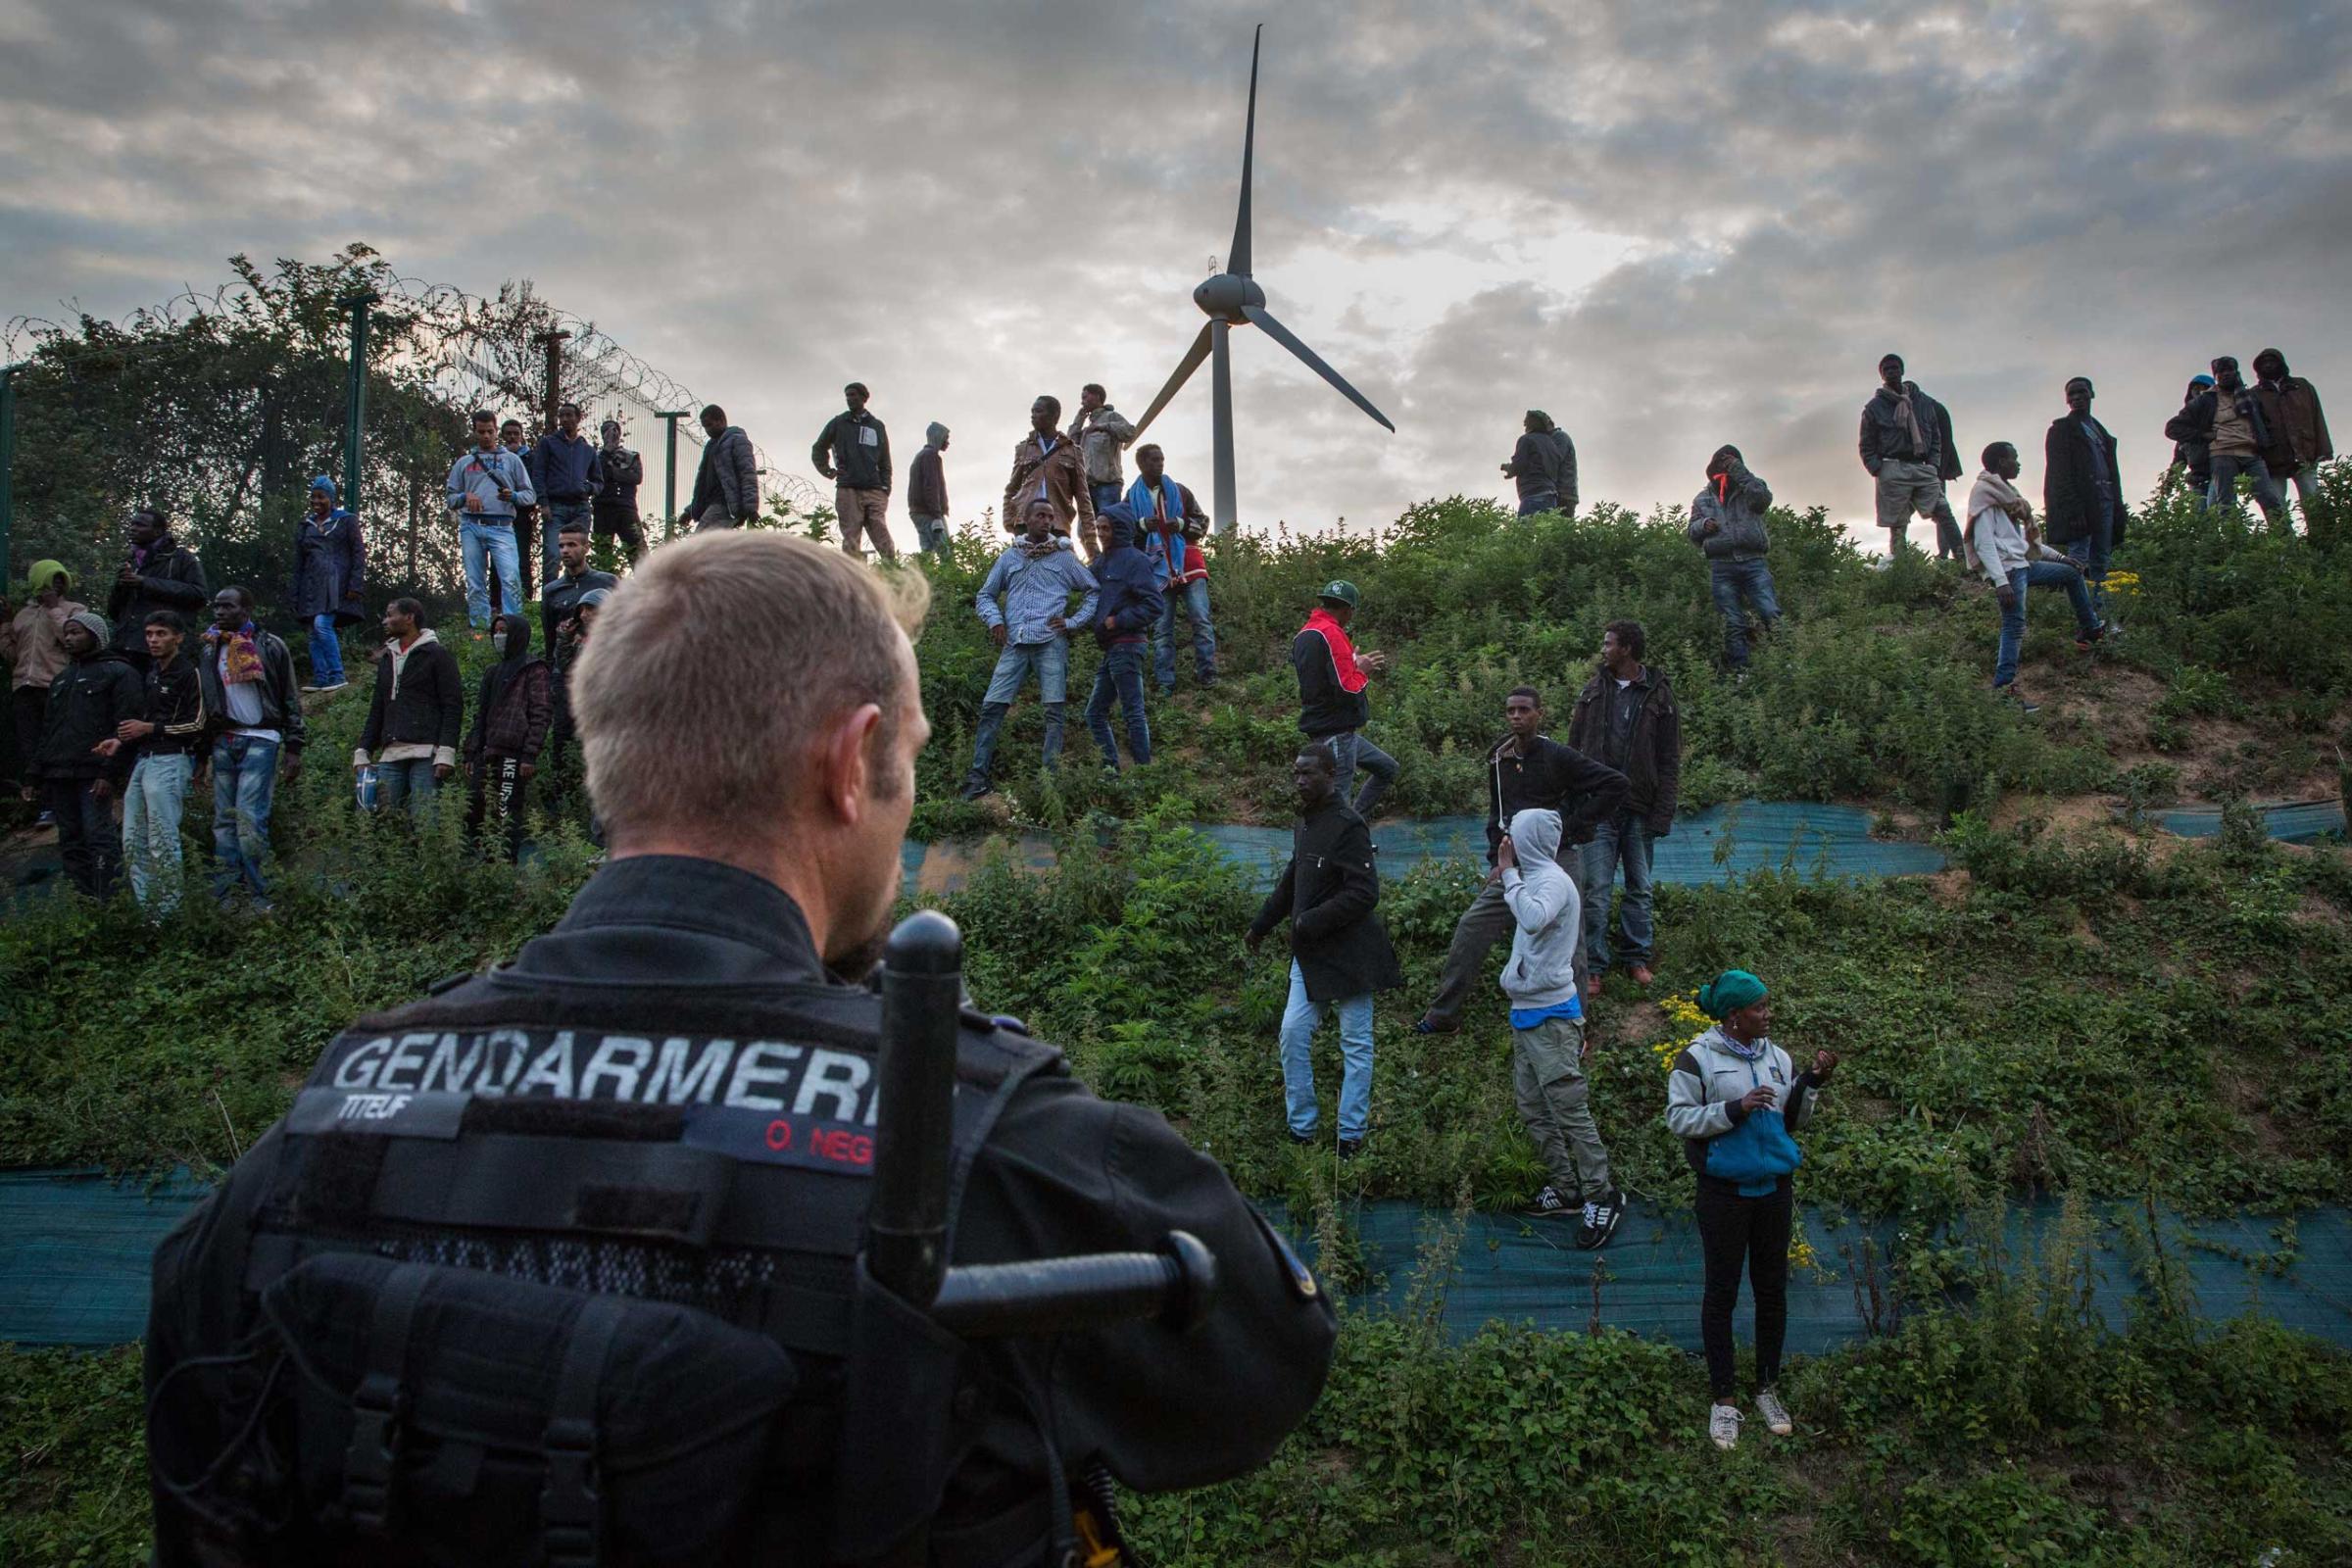 Gendarmerie attempt to prevent people from entering the Eurotunnel terminal in Coquelles in Calais, France. Hundreds of migrants were trying to enter the Channel Tunnel and onto trains heading to the United Kingdom. July 30, 2015